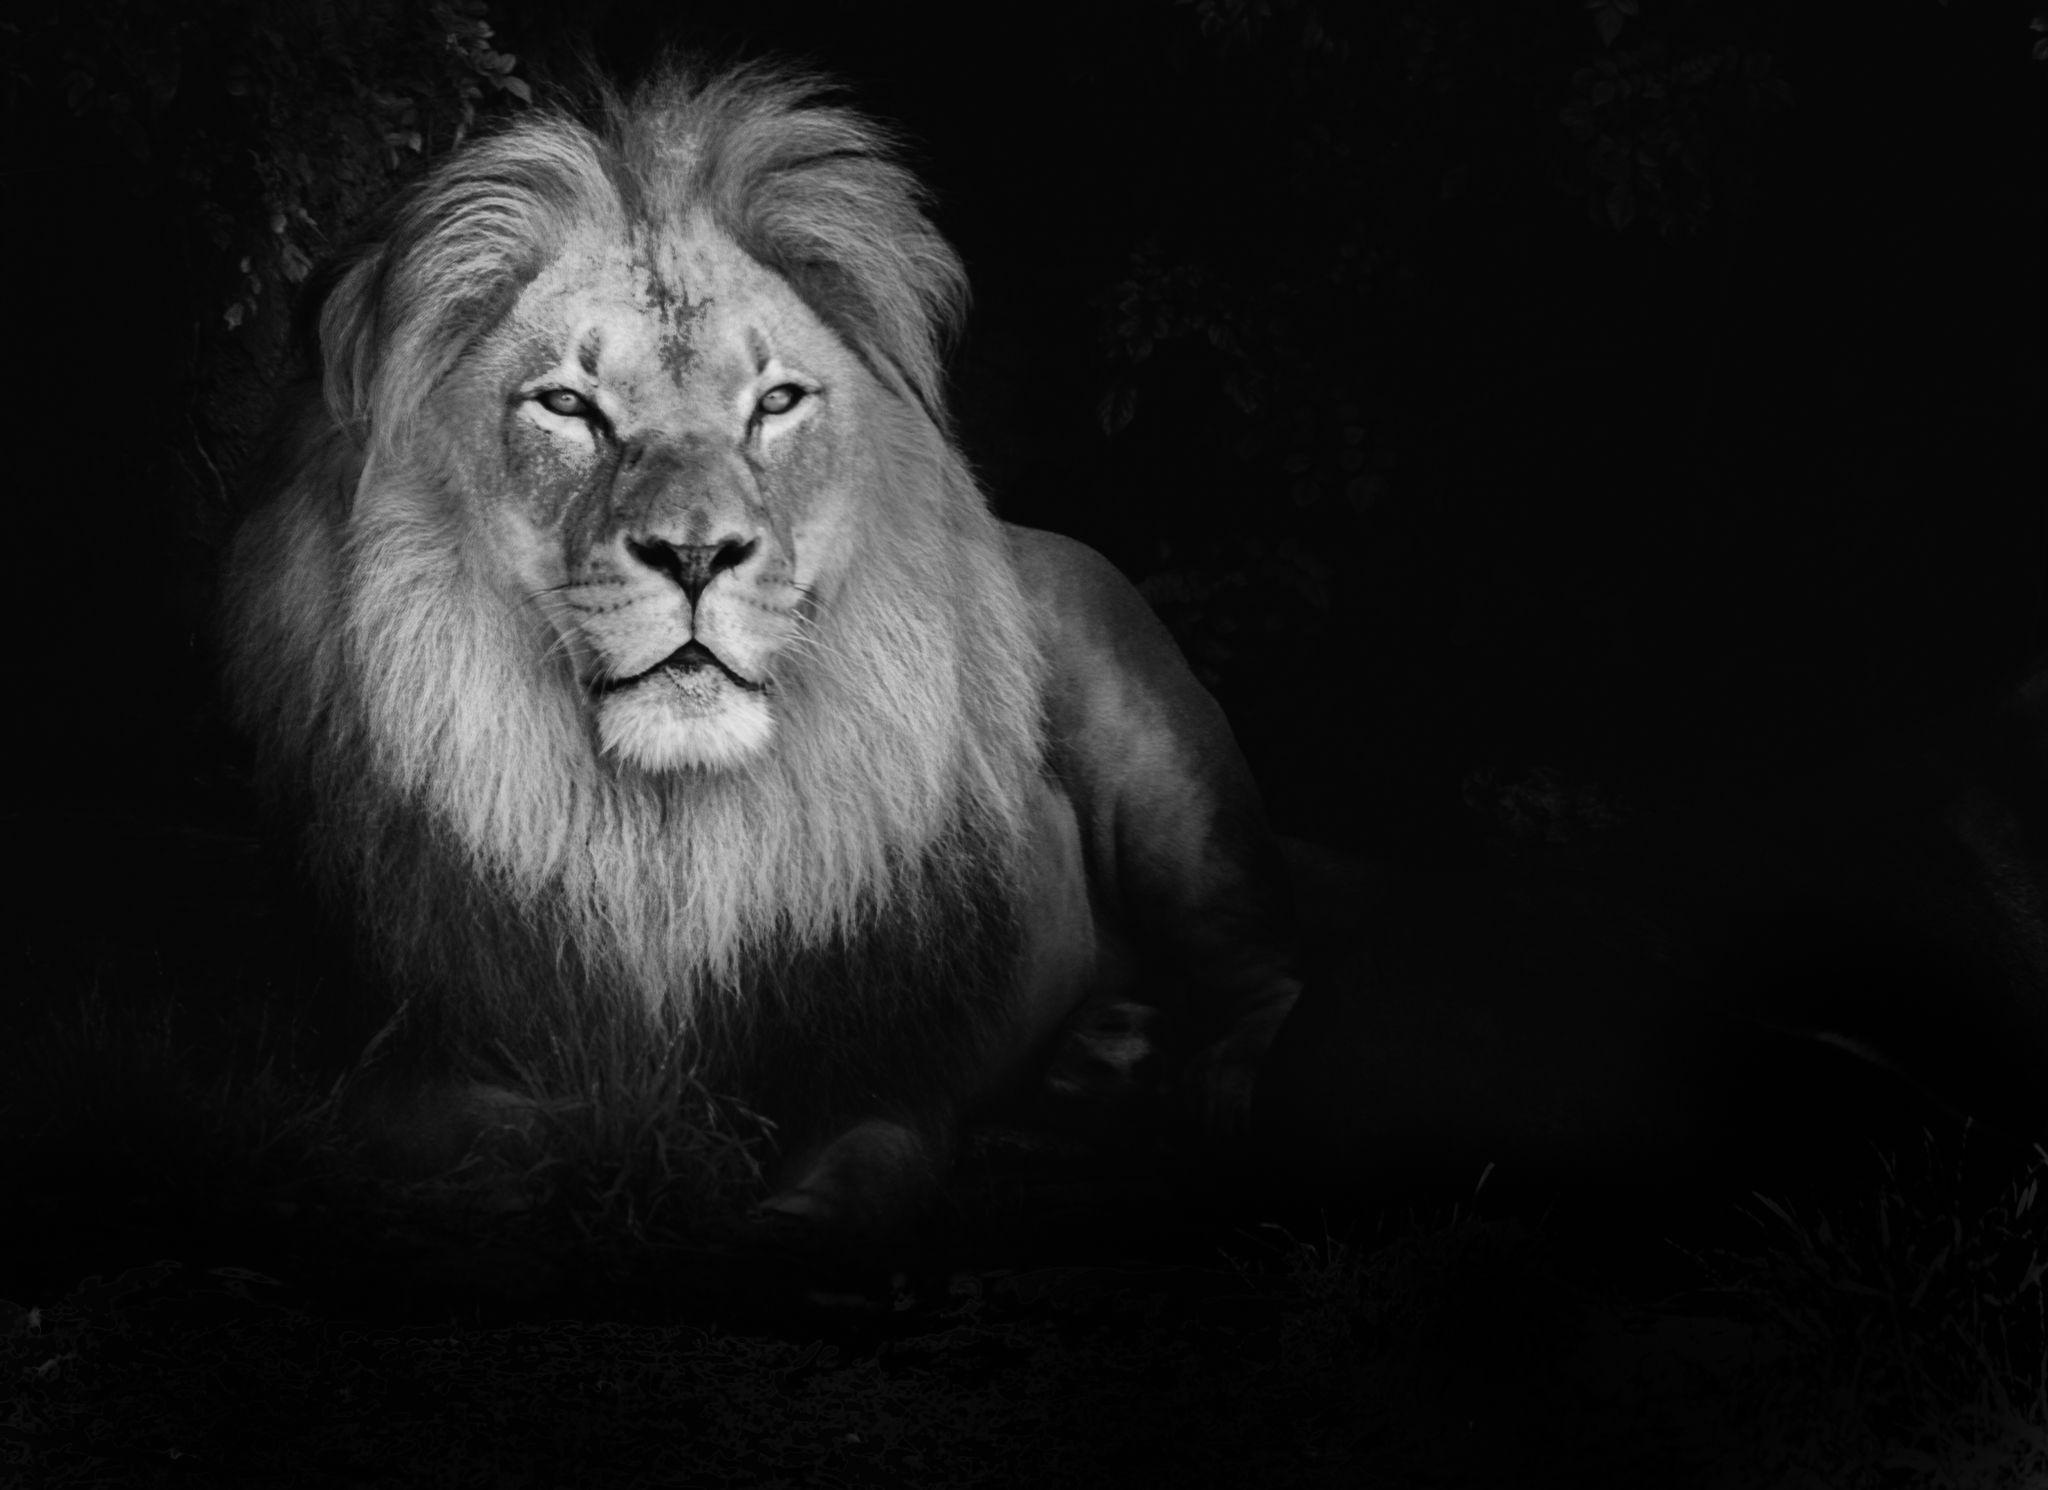 Lion Black and White HD Image Wallpaper 6474